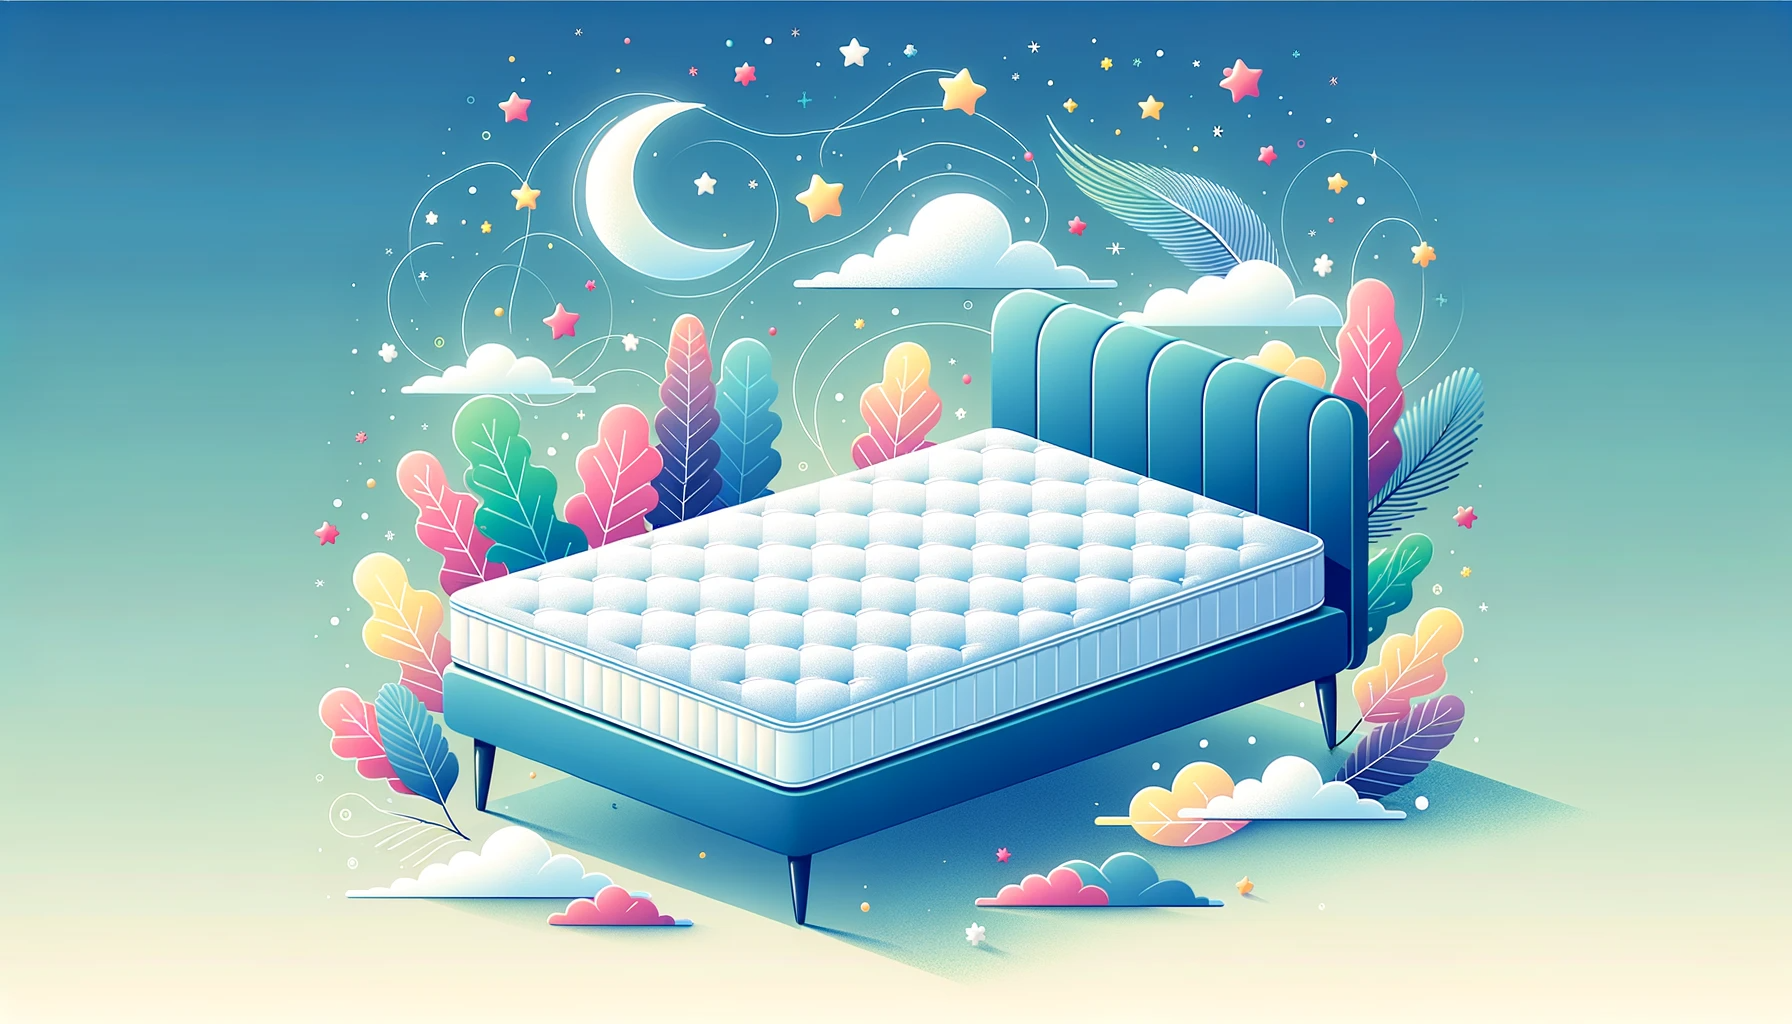 16:9 colorful vector illustration of a serene bedroom environment where the focus is on a plush mattress topper placed on top of a bed. Surrounding the bed are dreamy elements like stars and floating feathers, emphasizing the enhanced comfort the topper brings.